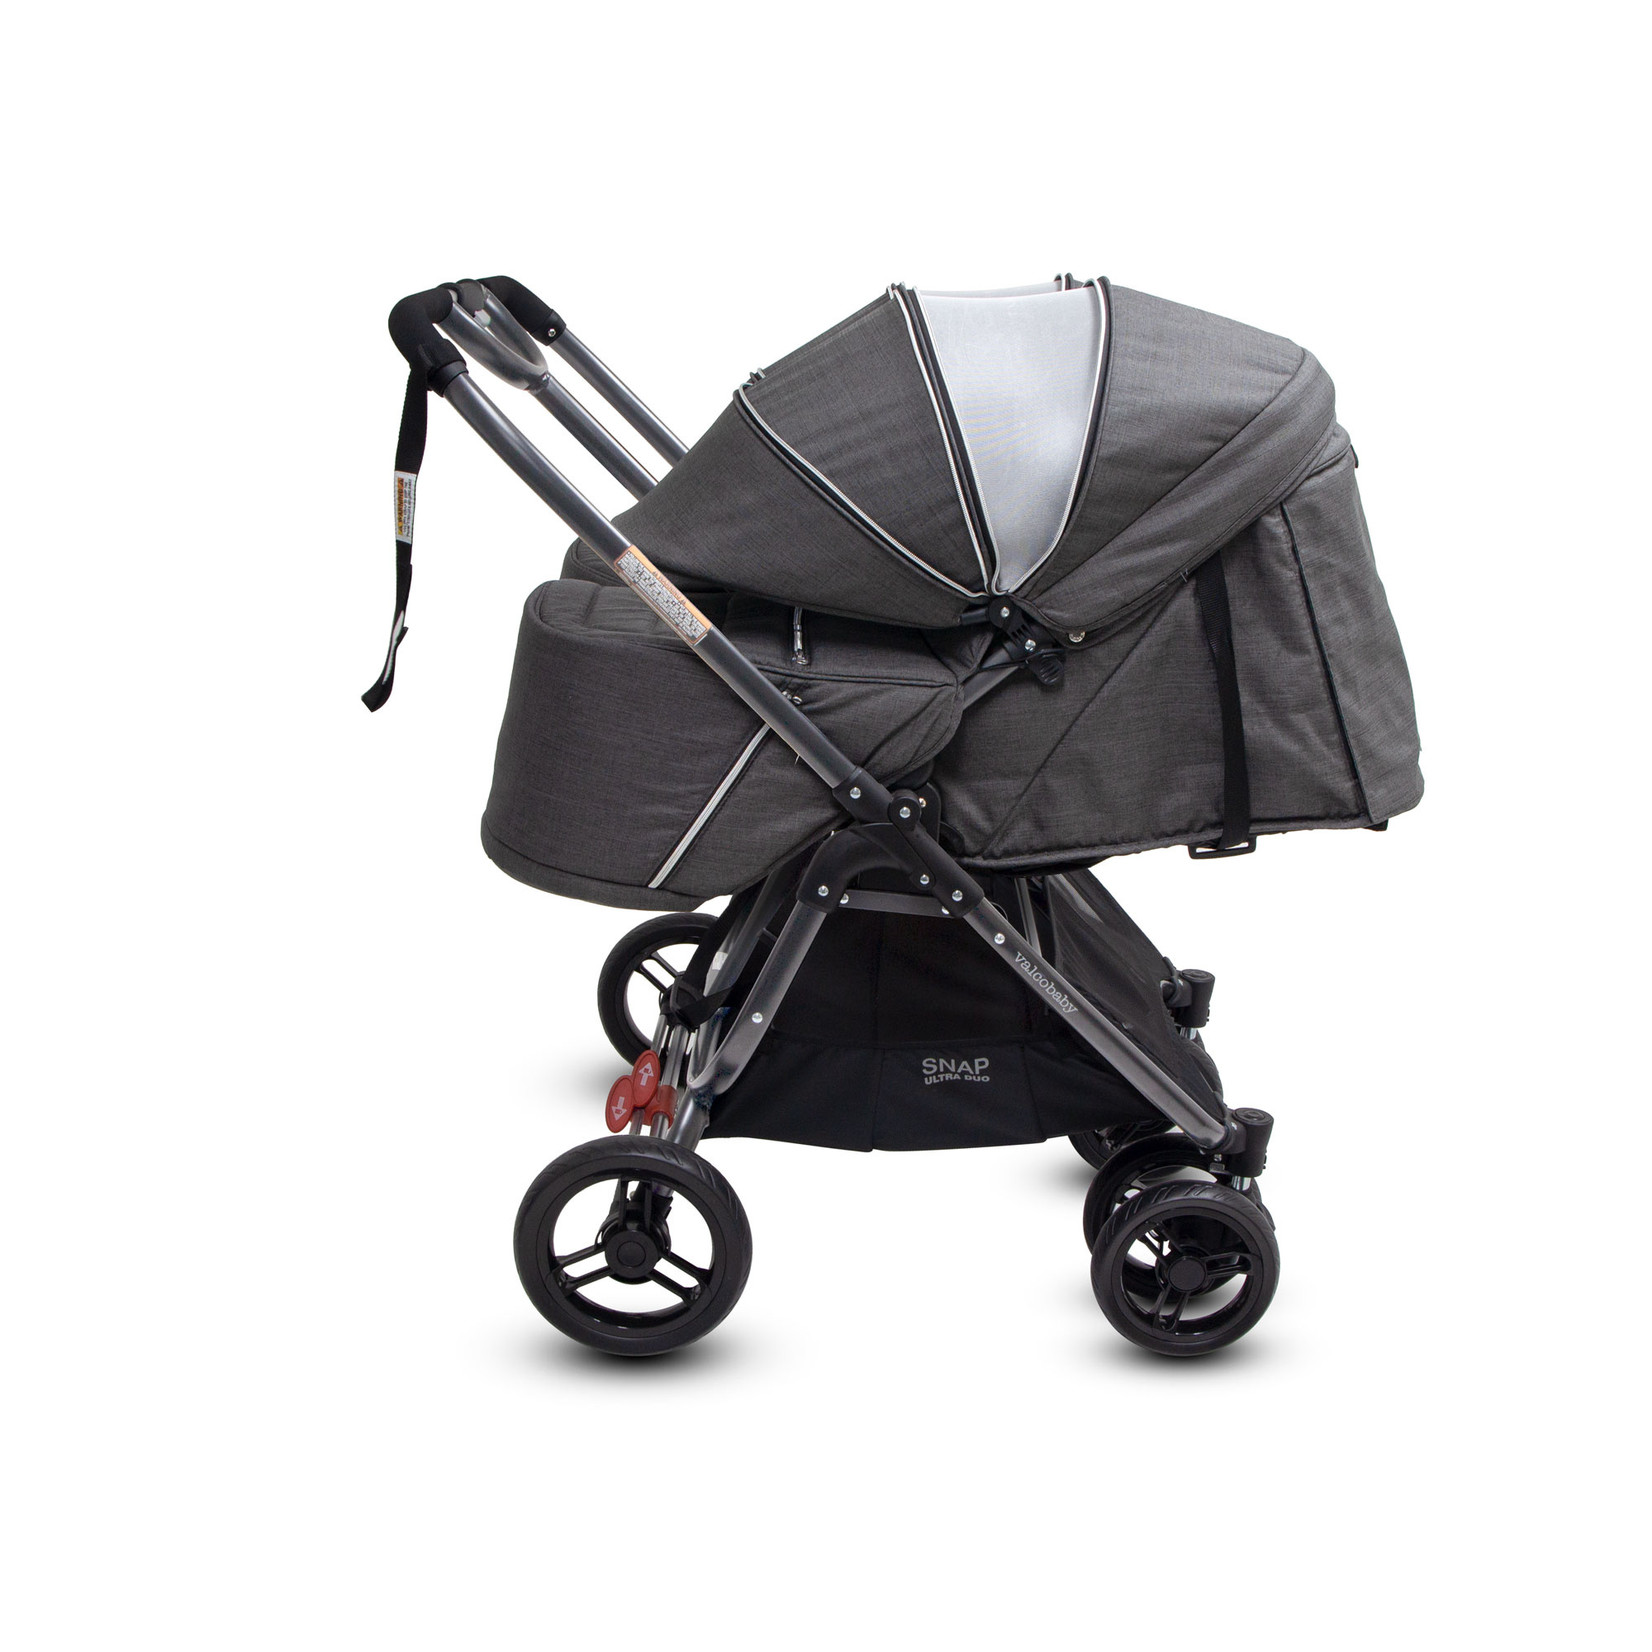 Valco Baby Snap Ultra Duo Tailormade-Charcoal